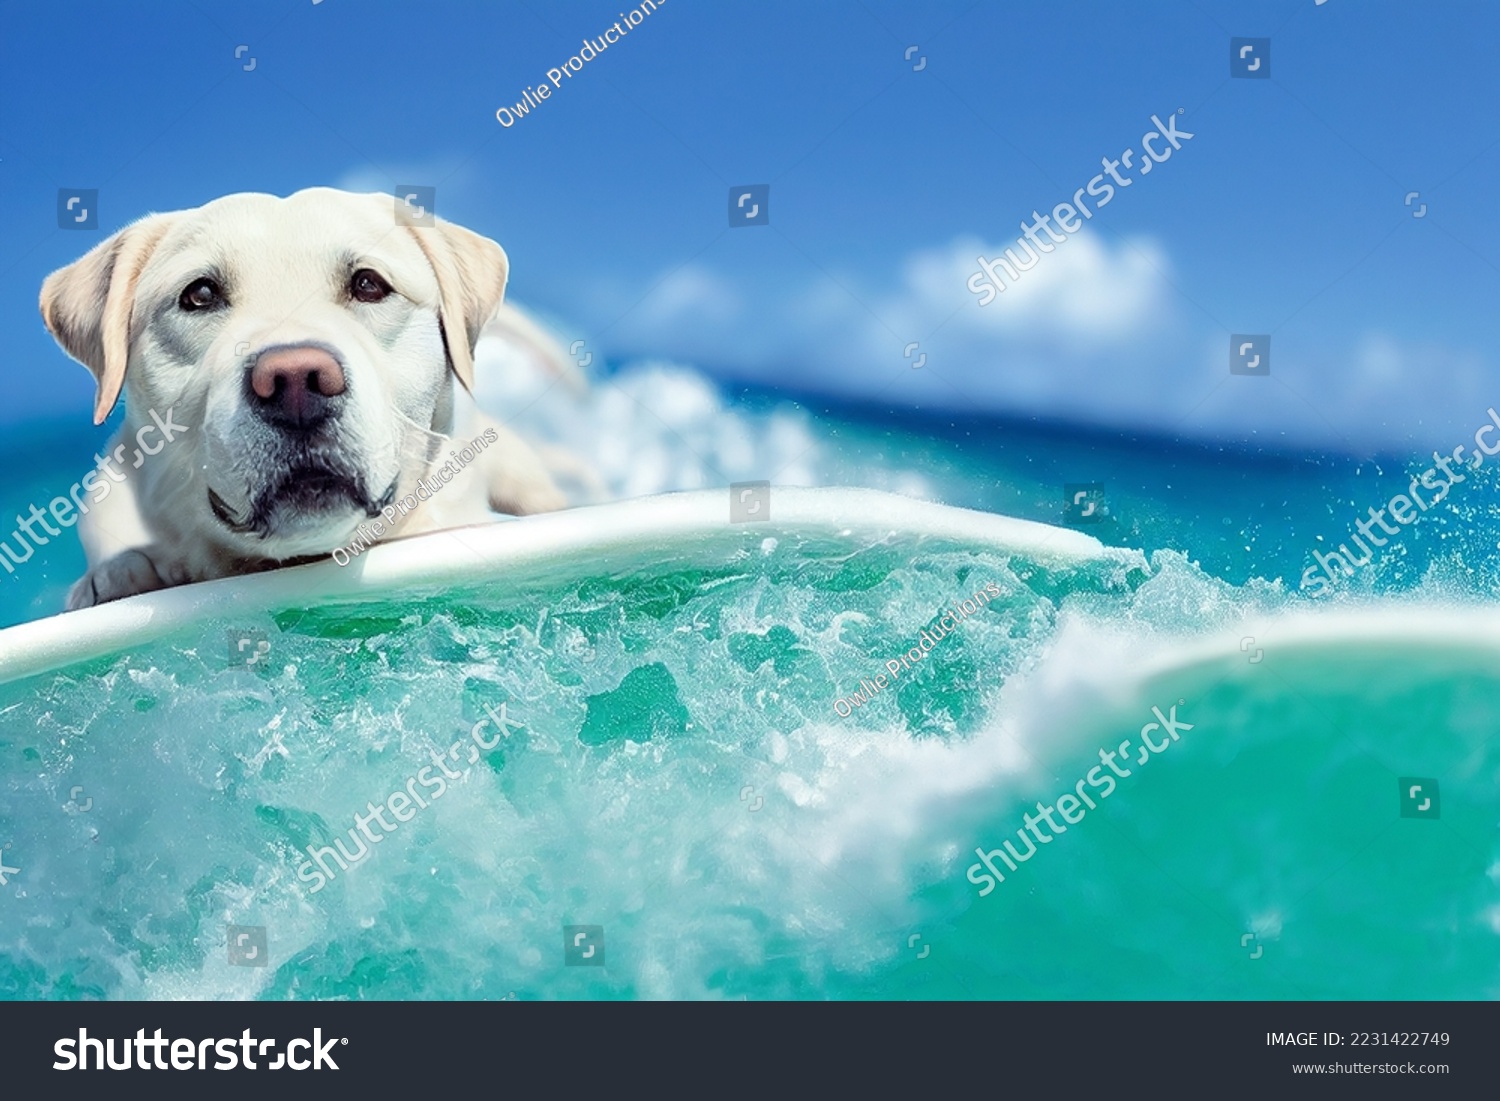 Spectacular labrador lying on surfboard, wave with teal sea water splash on surfing board with background clear sky summertime at ocean shore. Dog surfing on the beach. #2231422749